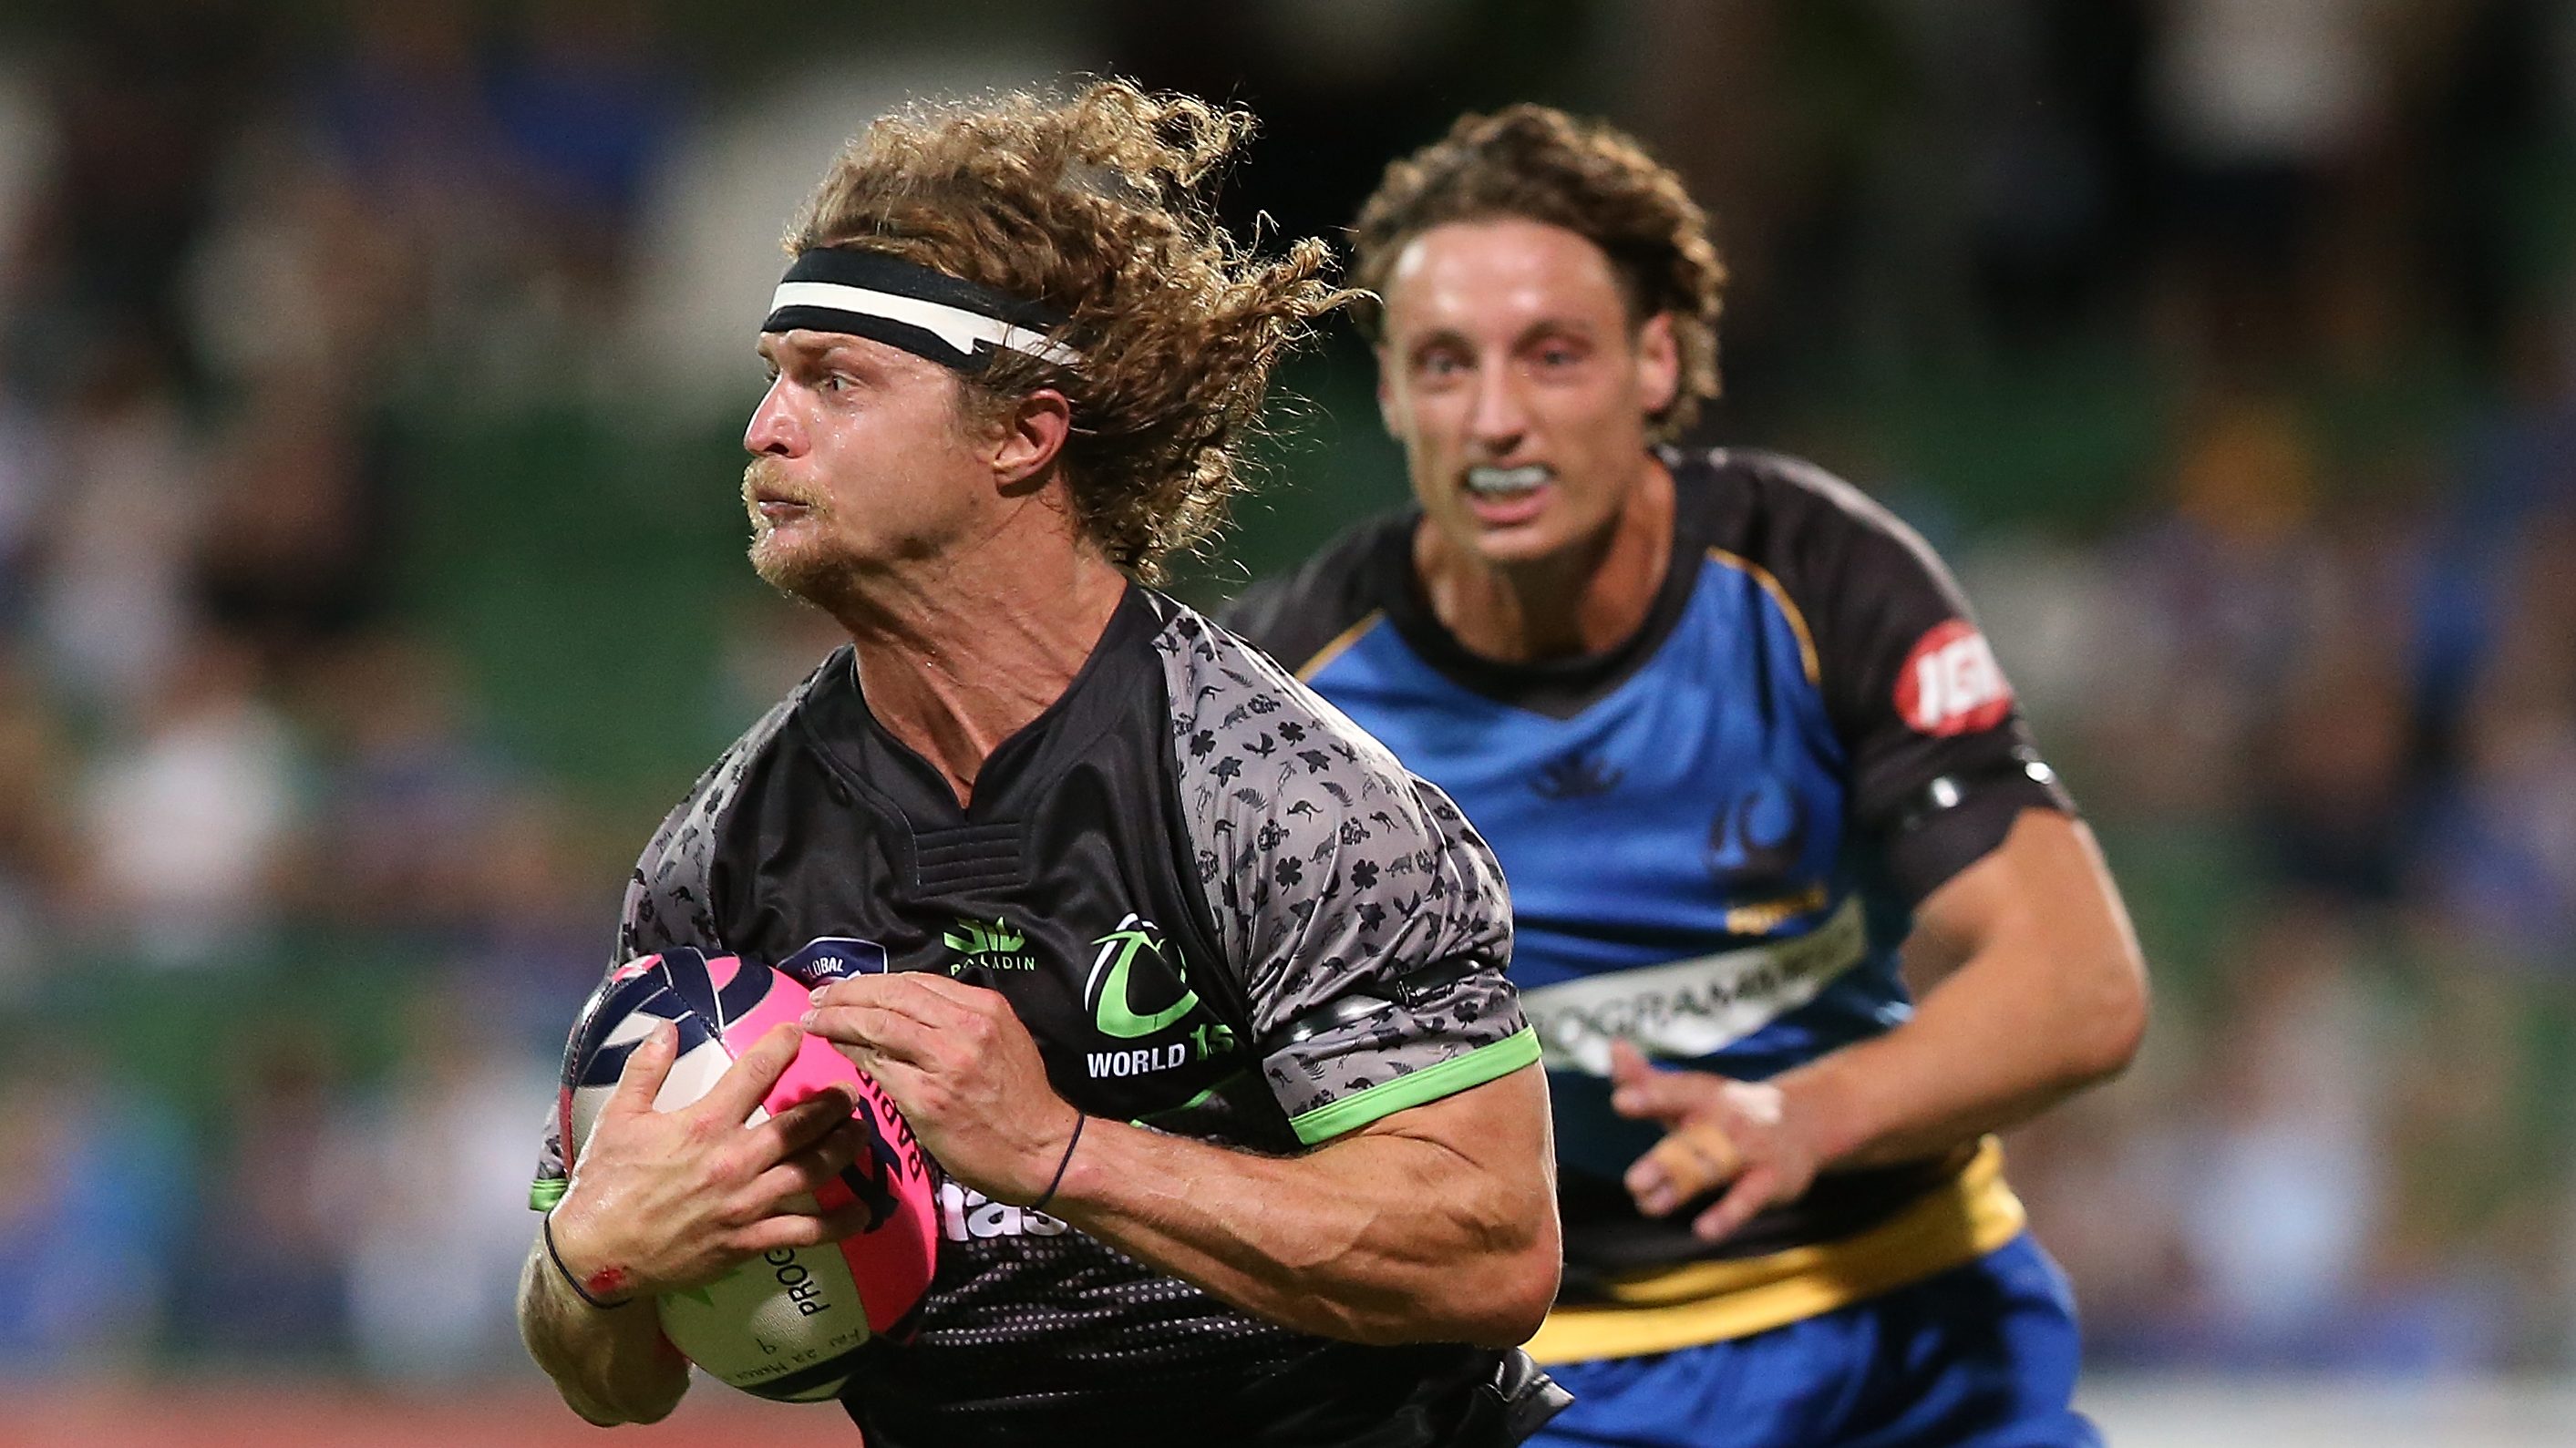 Nick Cummins, Australian rugby guy, runs with the ball in 2019